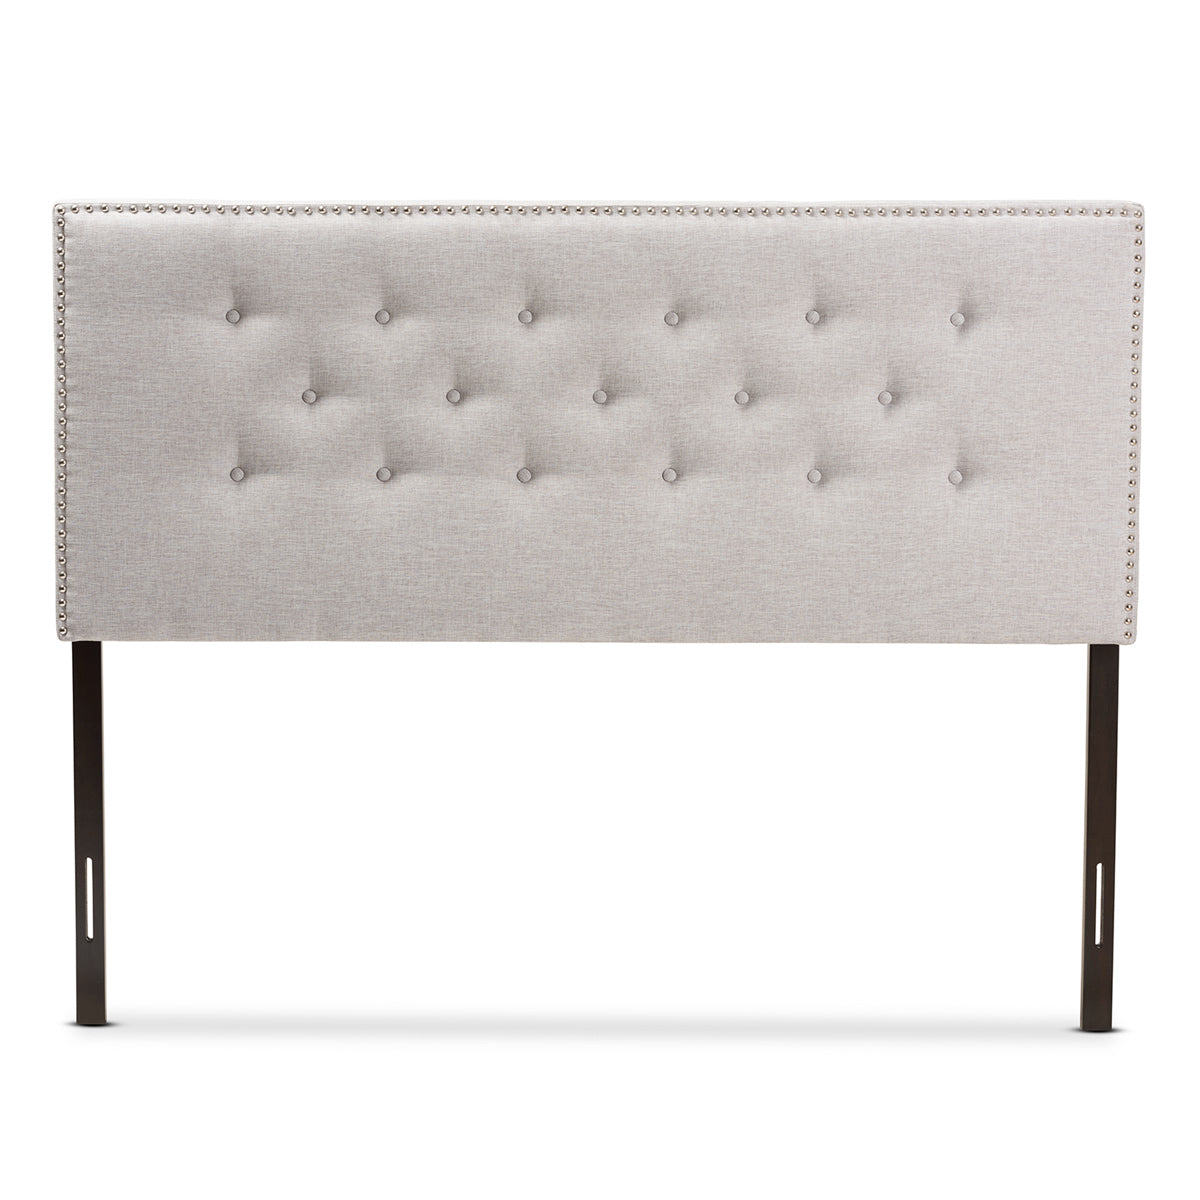 Baxton Studio Windsor Modern and Contemporary Greyish Beige Fabric Upholstered Queen Size Headboard Baxton Studio-Headboards-Minimal And Modern - 2